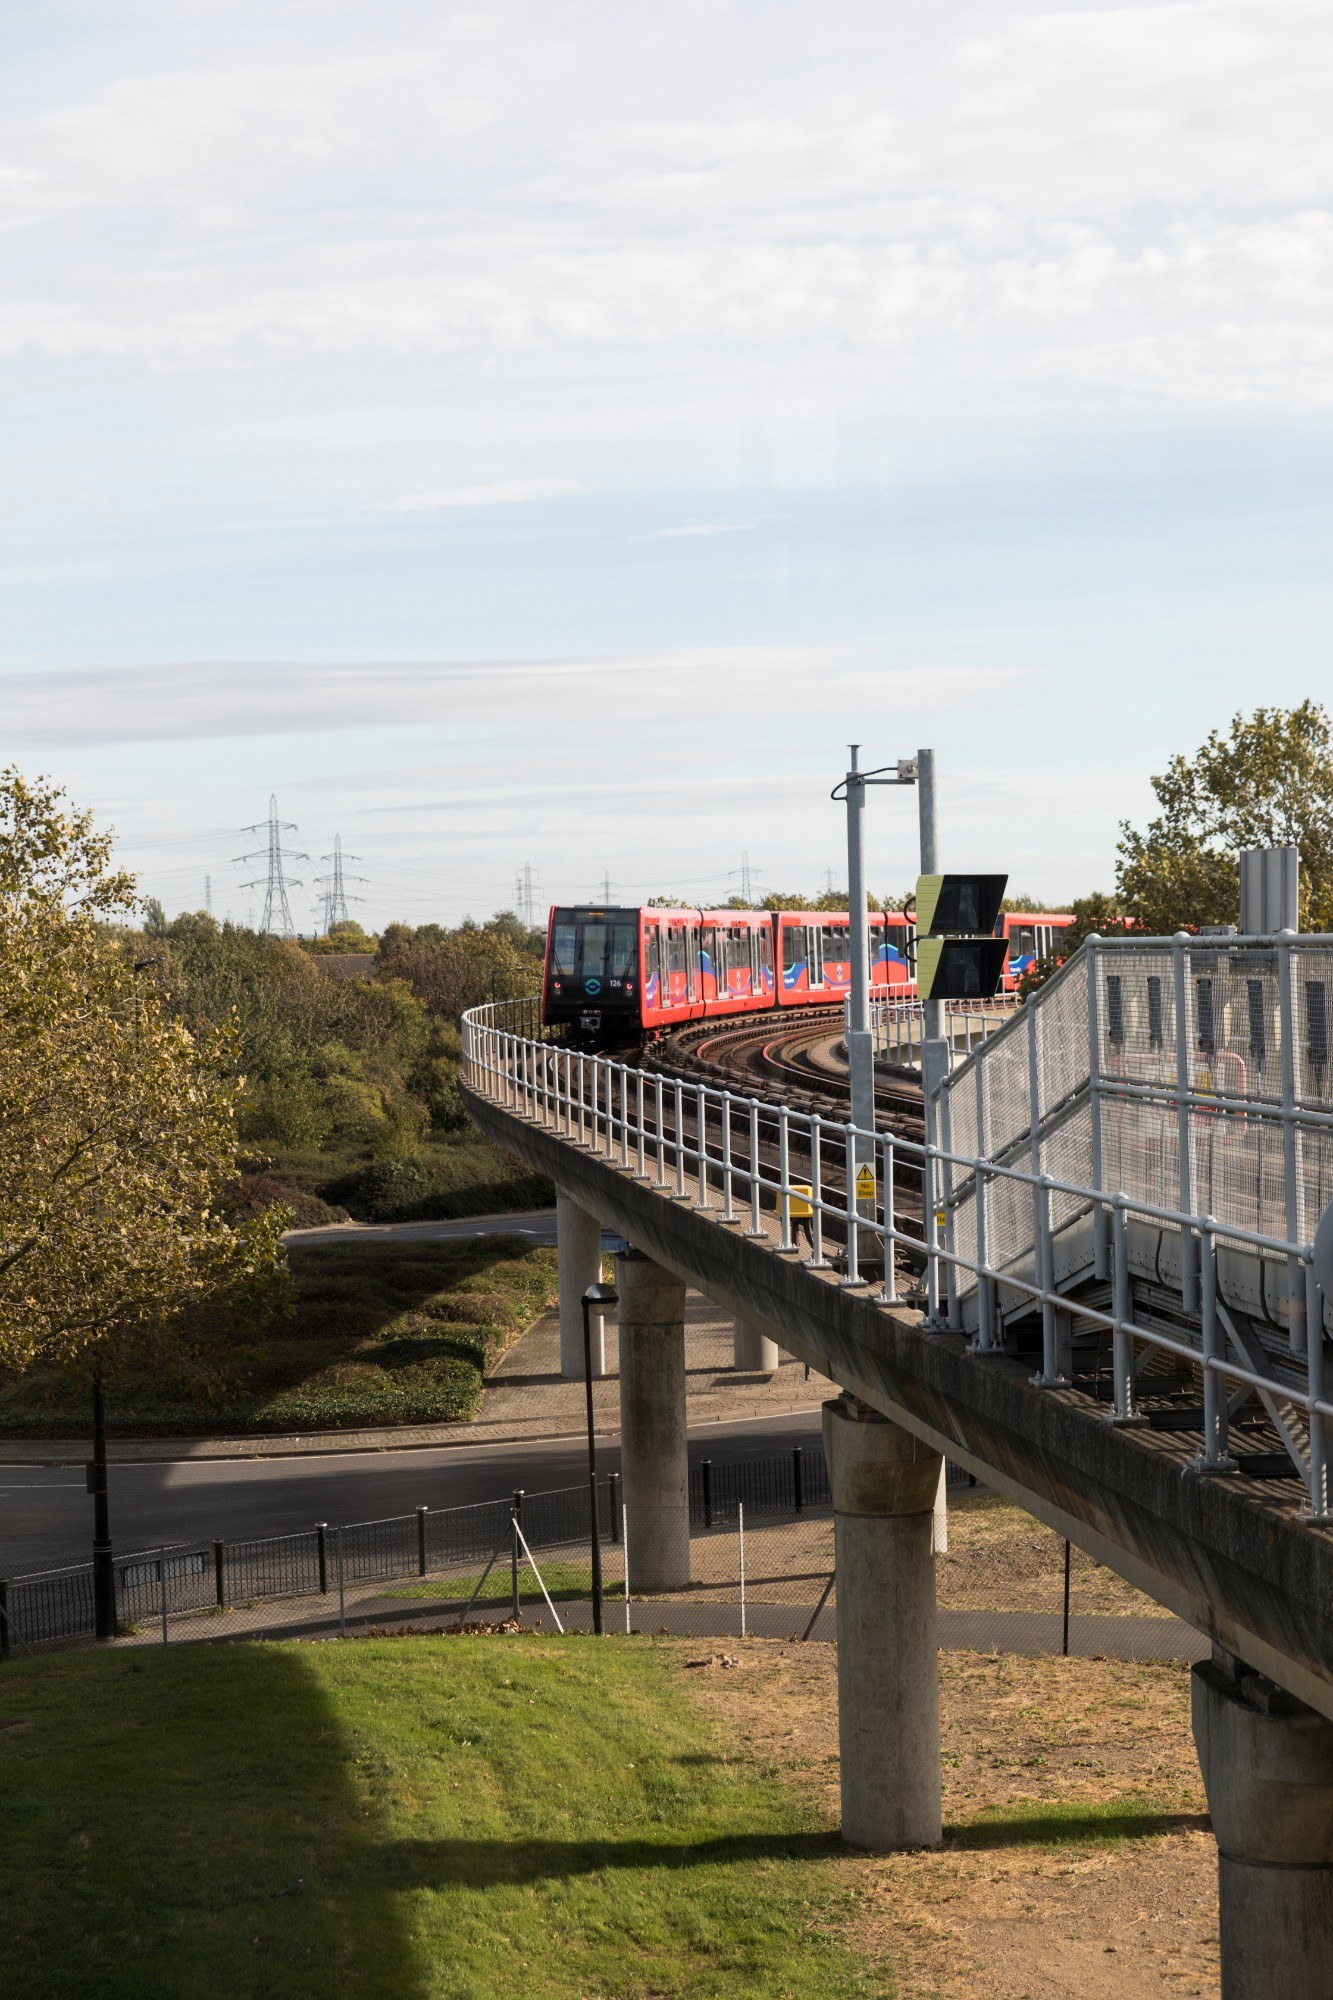 DLR train moving along tracks in the Royal Docks